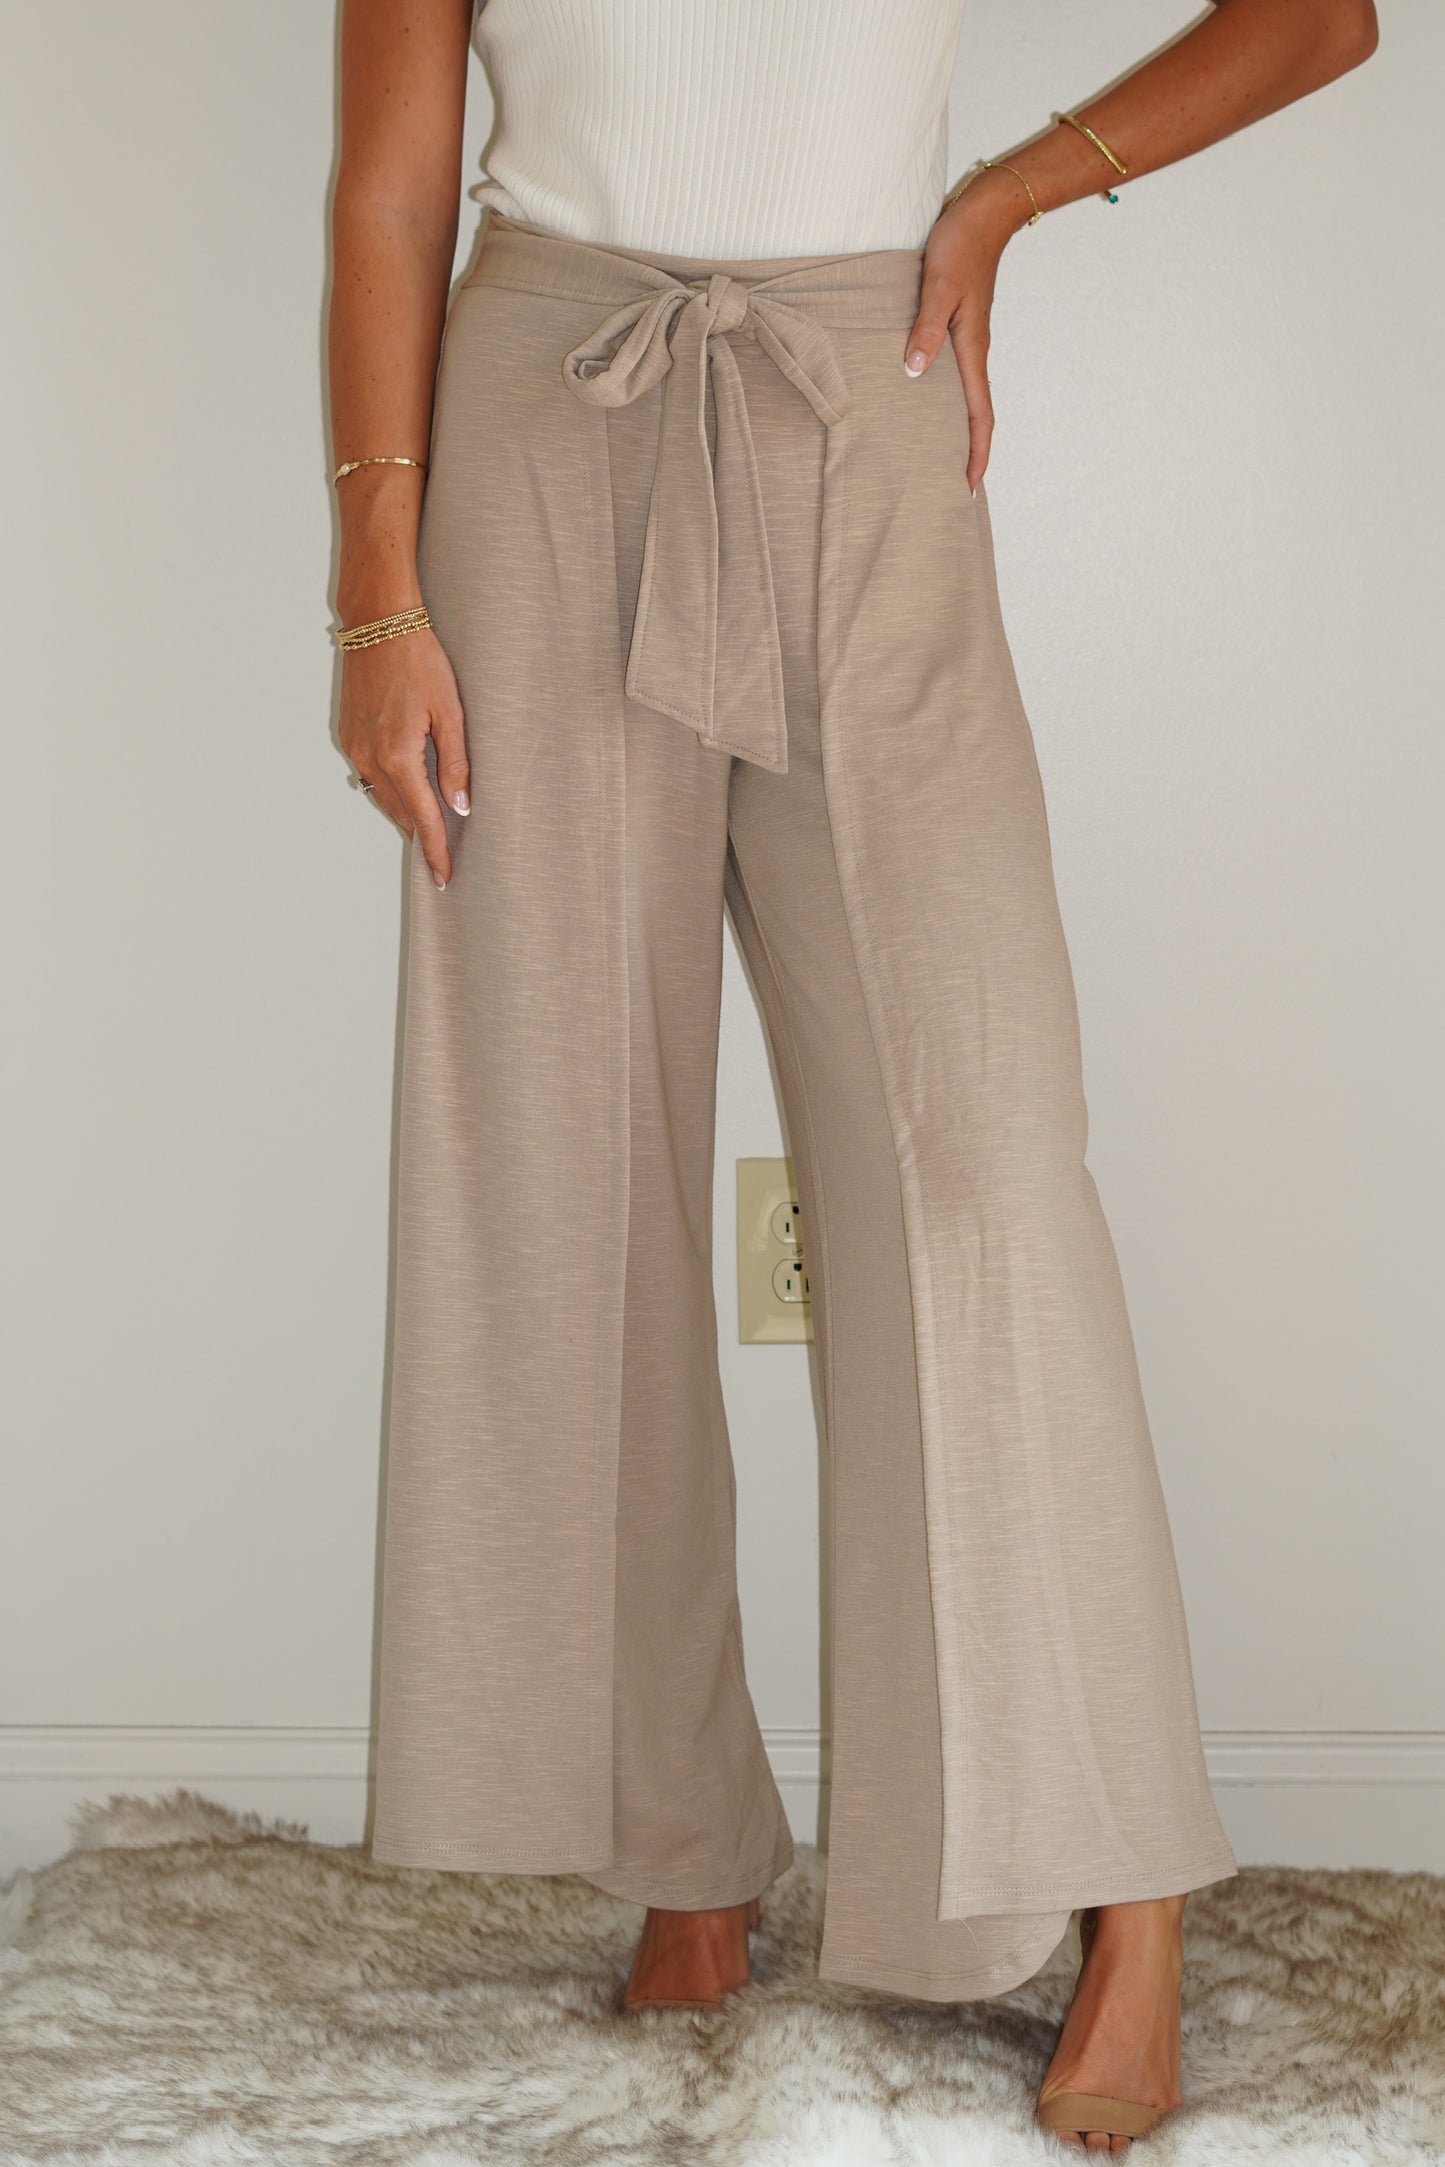 These Sadie Slub Knit Pants are so unique and such an essential to have in your closet this summer! Dress them up or down, these pants will have you looking so stylish!  Sadie Slub Knit Pants Elastic back waist band, and Self Tie Slit Detail 60% Polyester, 35% Rayon, 5% Spandex